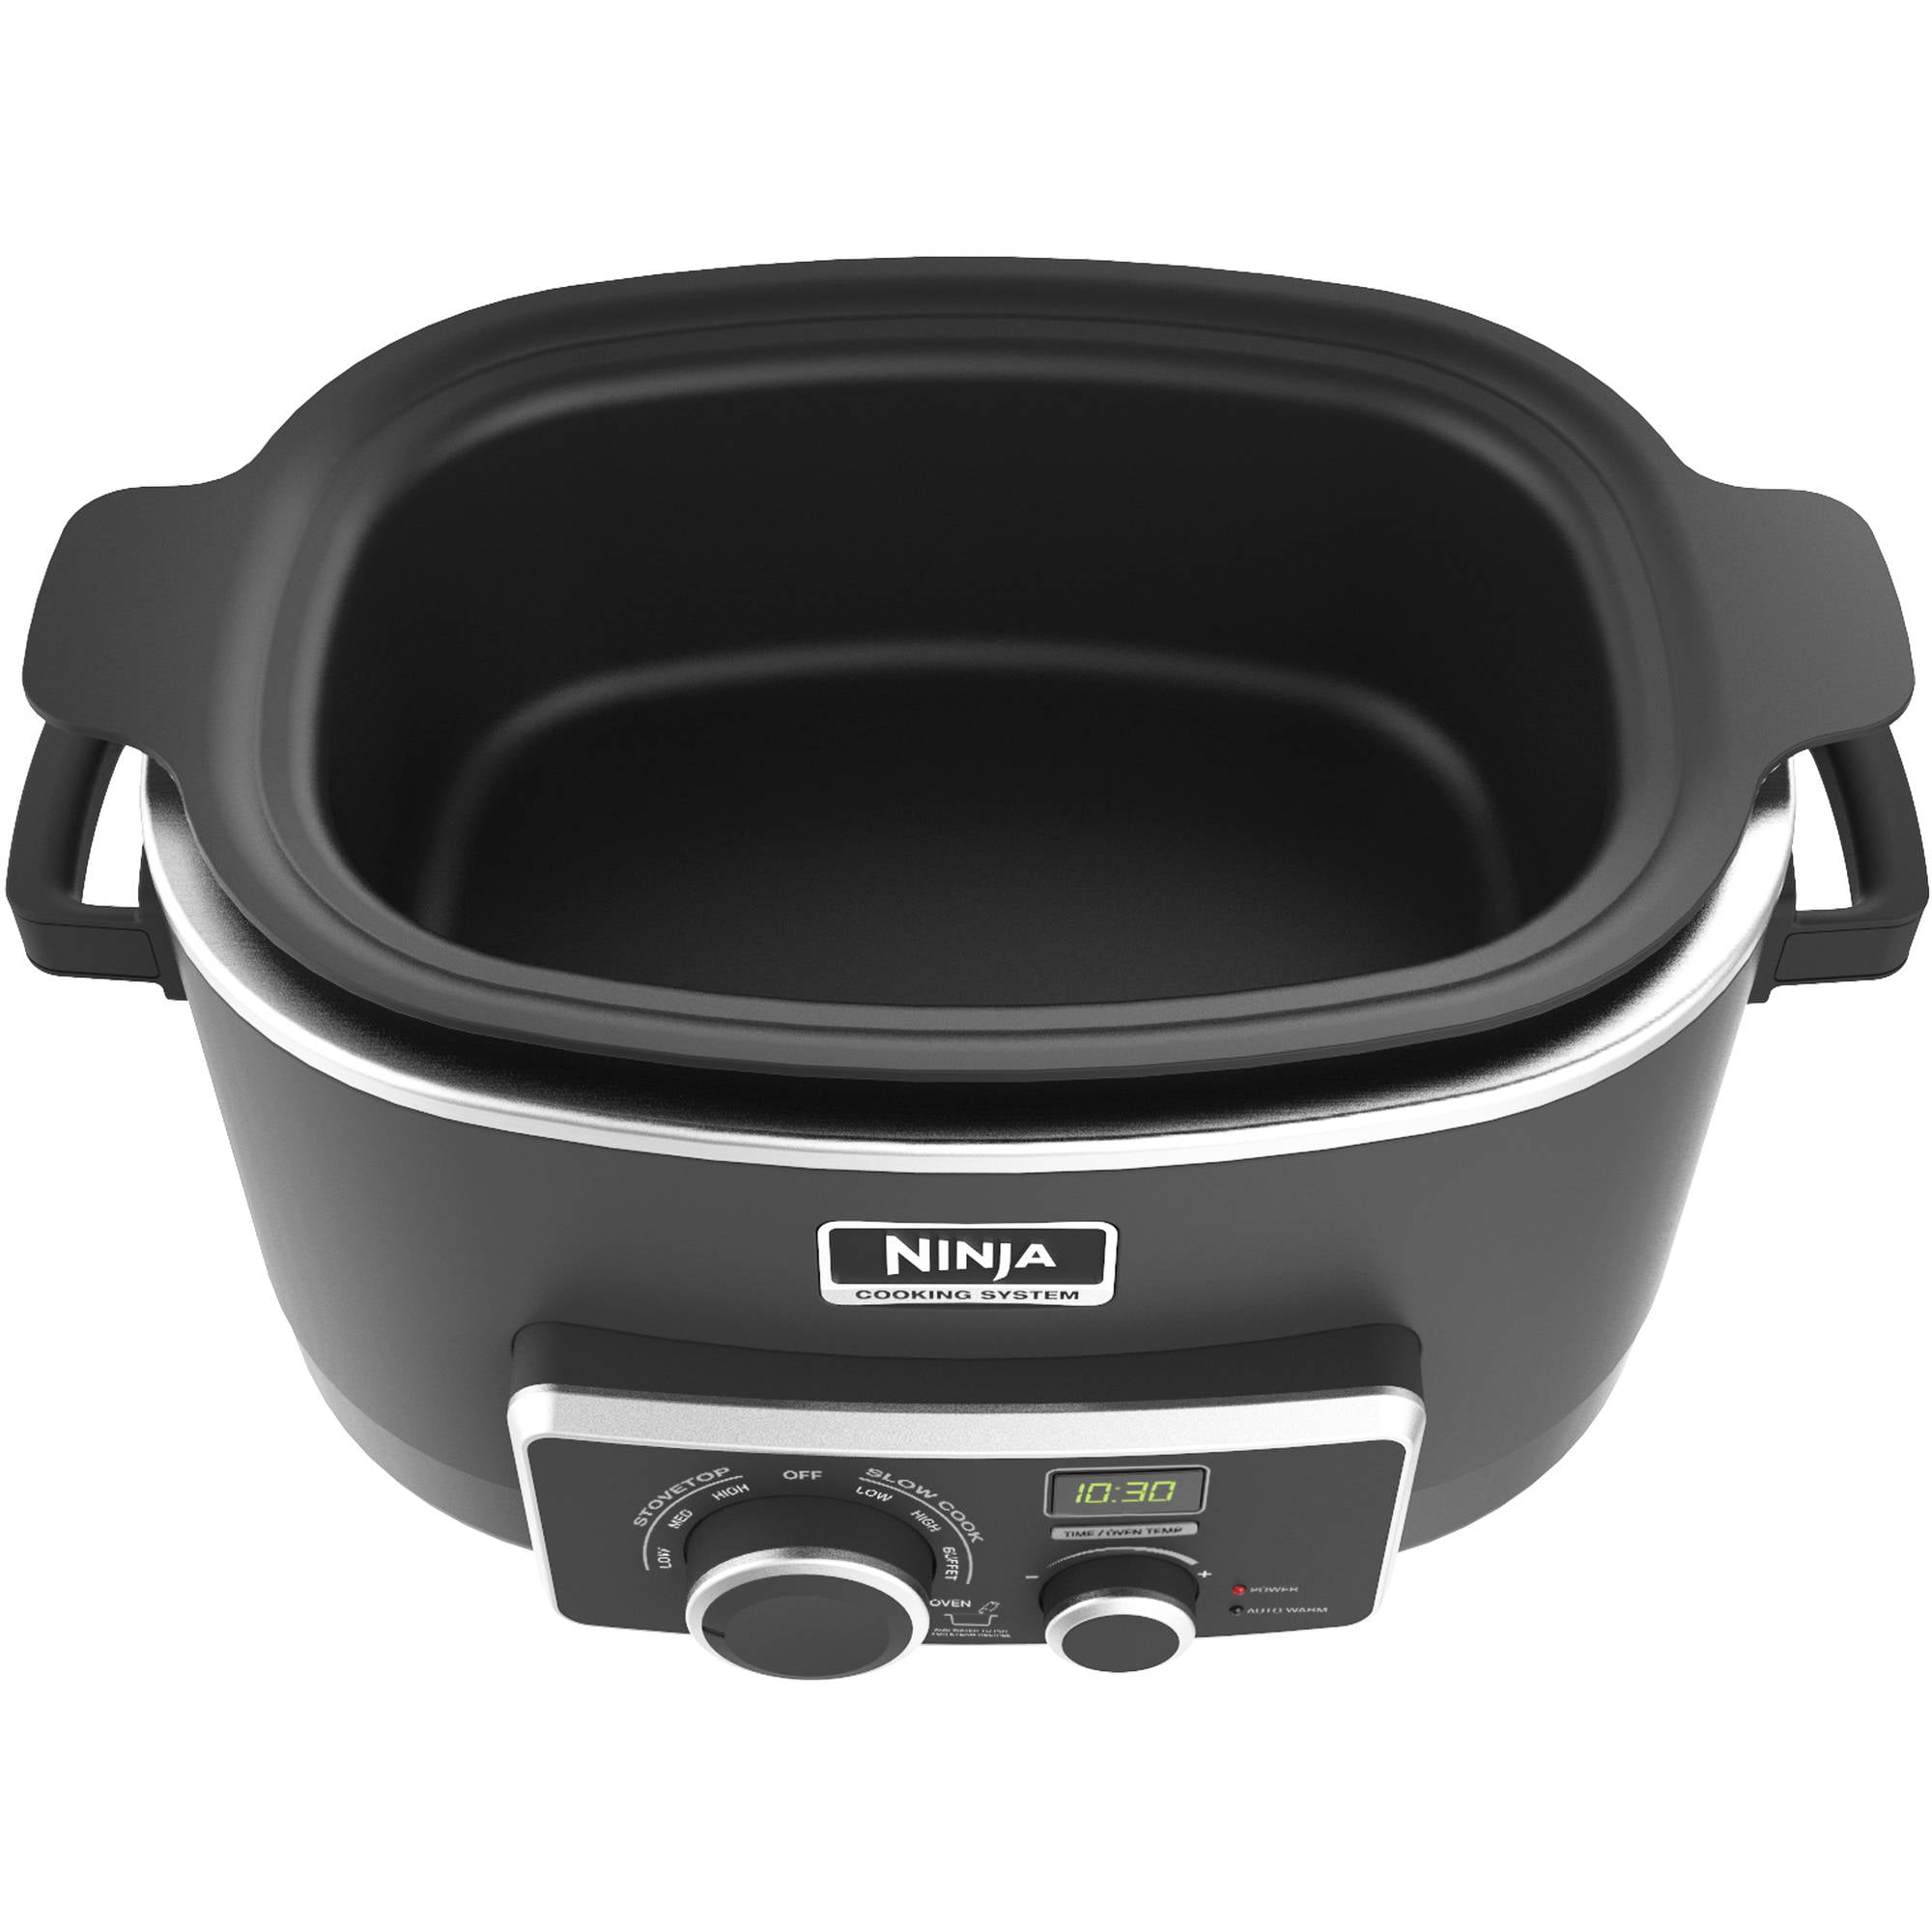 Product Review: Ninja® 3-in-1 Cooking System